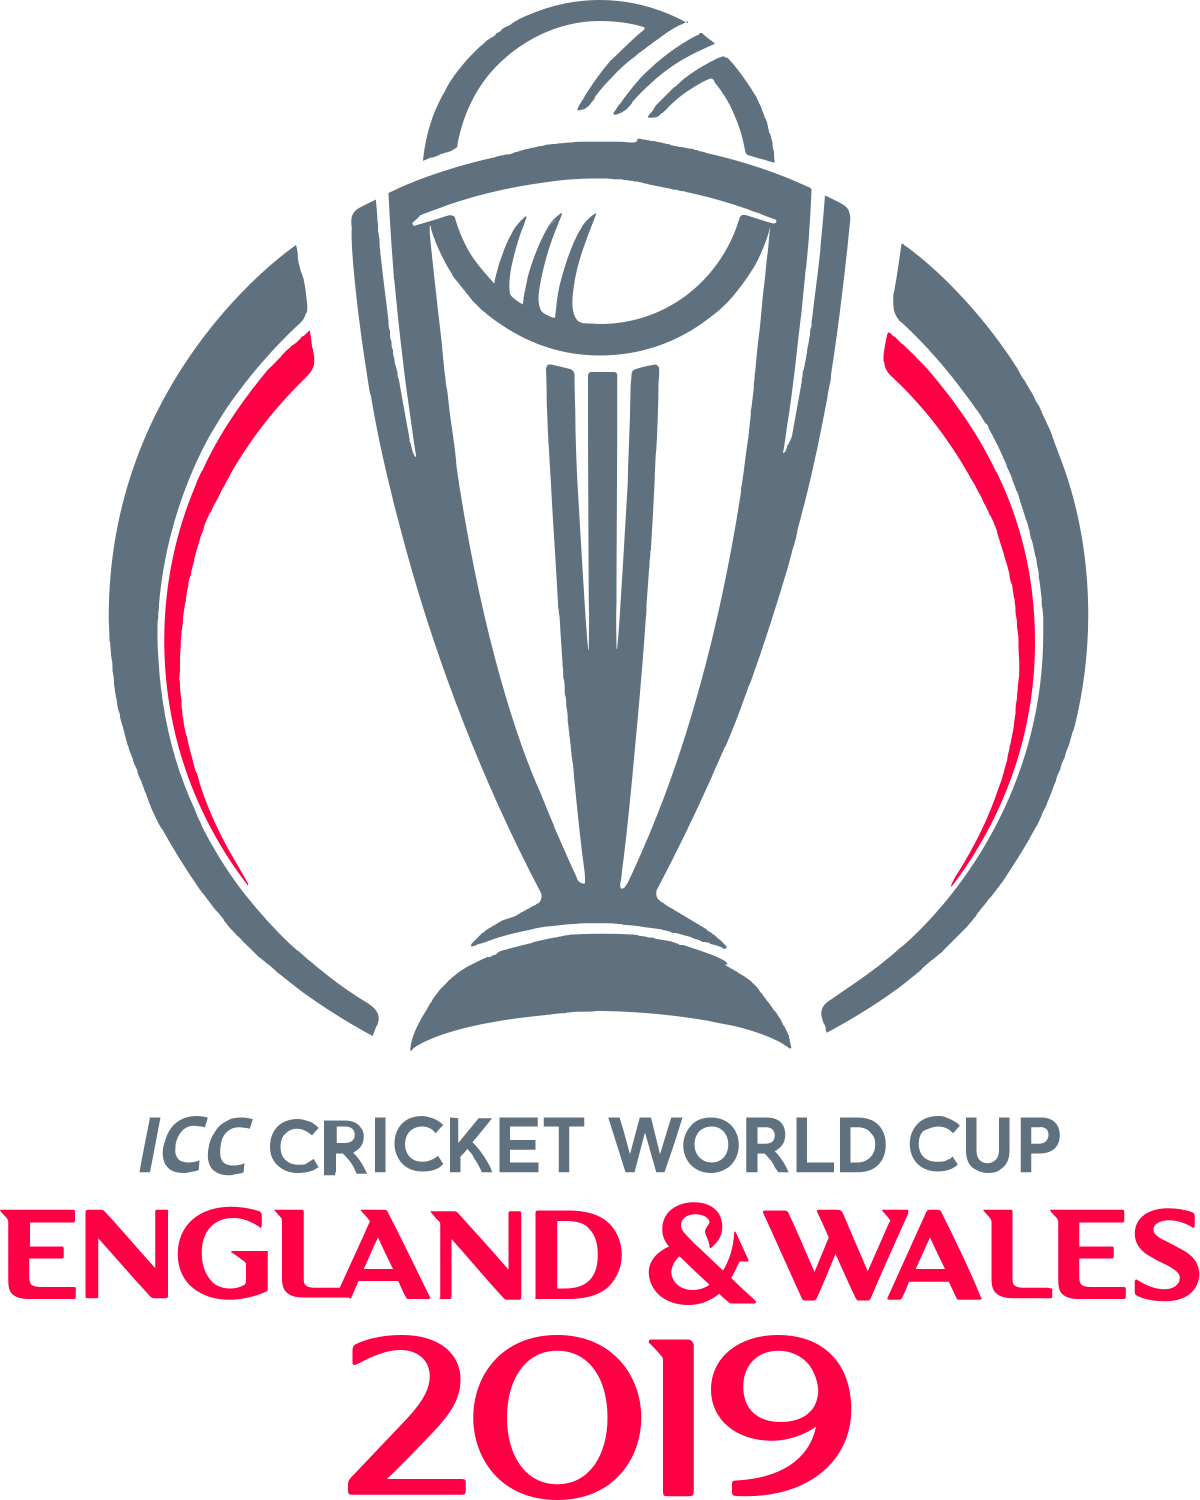 Icc Cricket World Cup Logo Png Transparent Image All